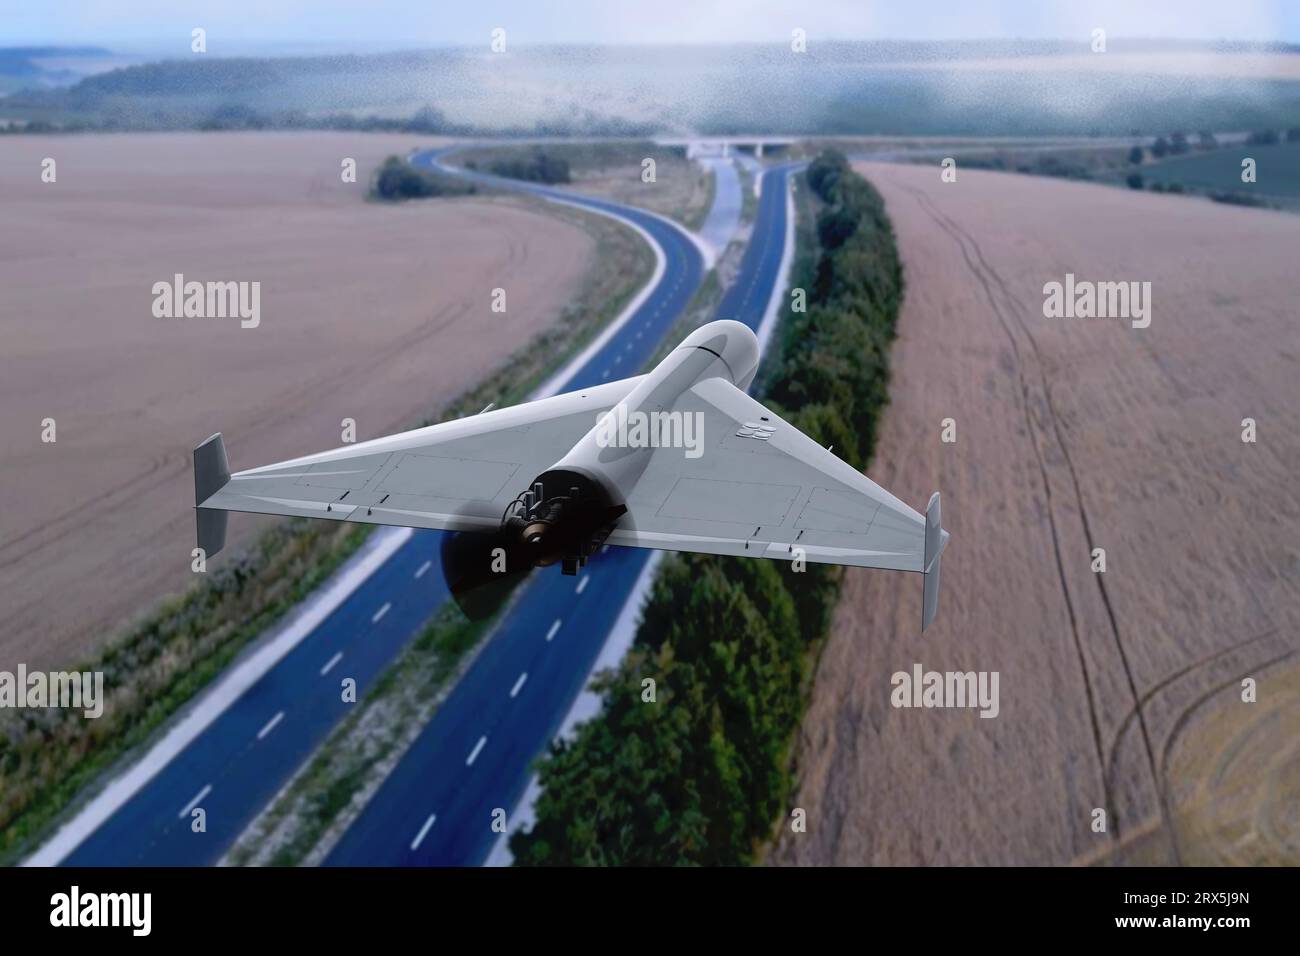 Combat drone flying over highway, country landscape, top view, 3d rendering. Concept: war in Ukraine, Russian drone attack. Stock Photo